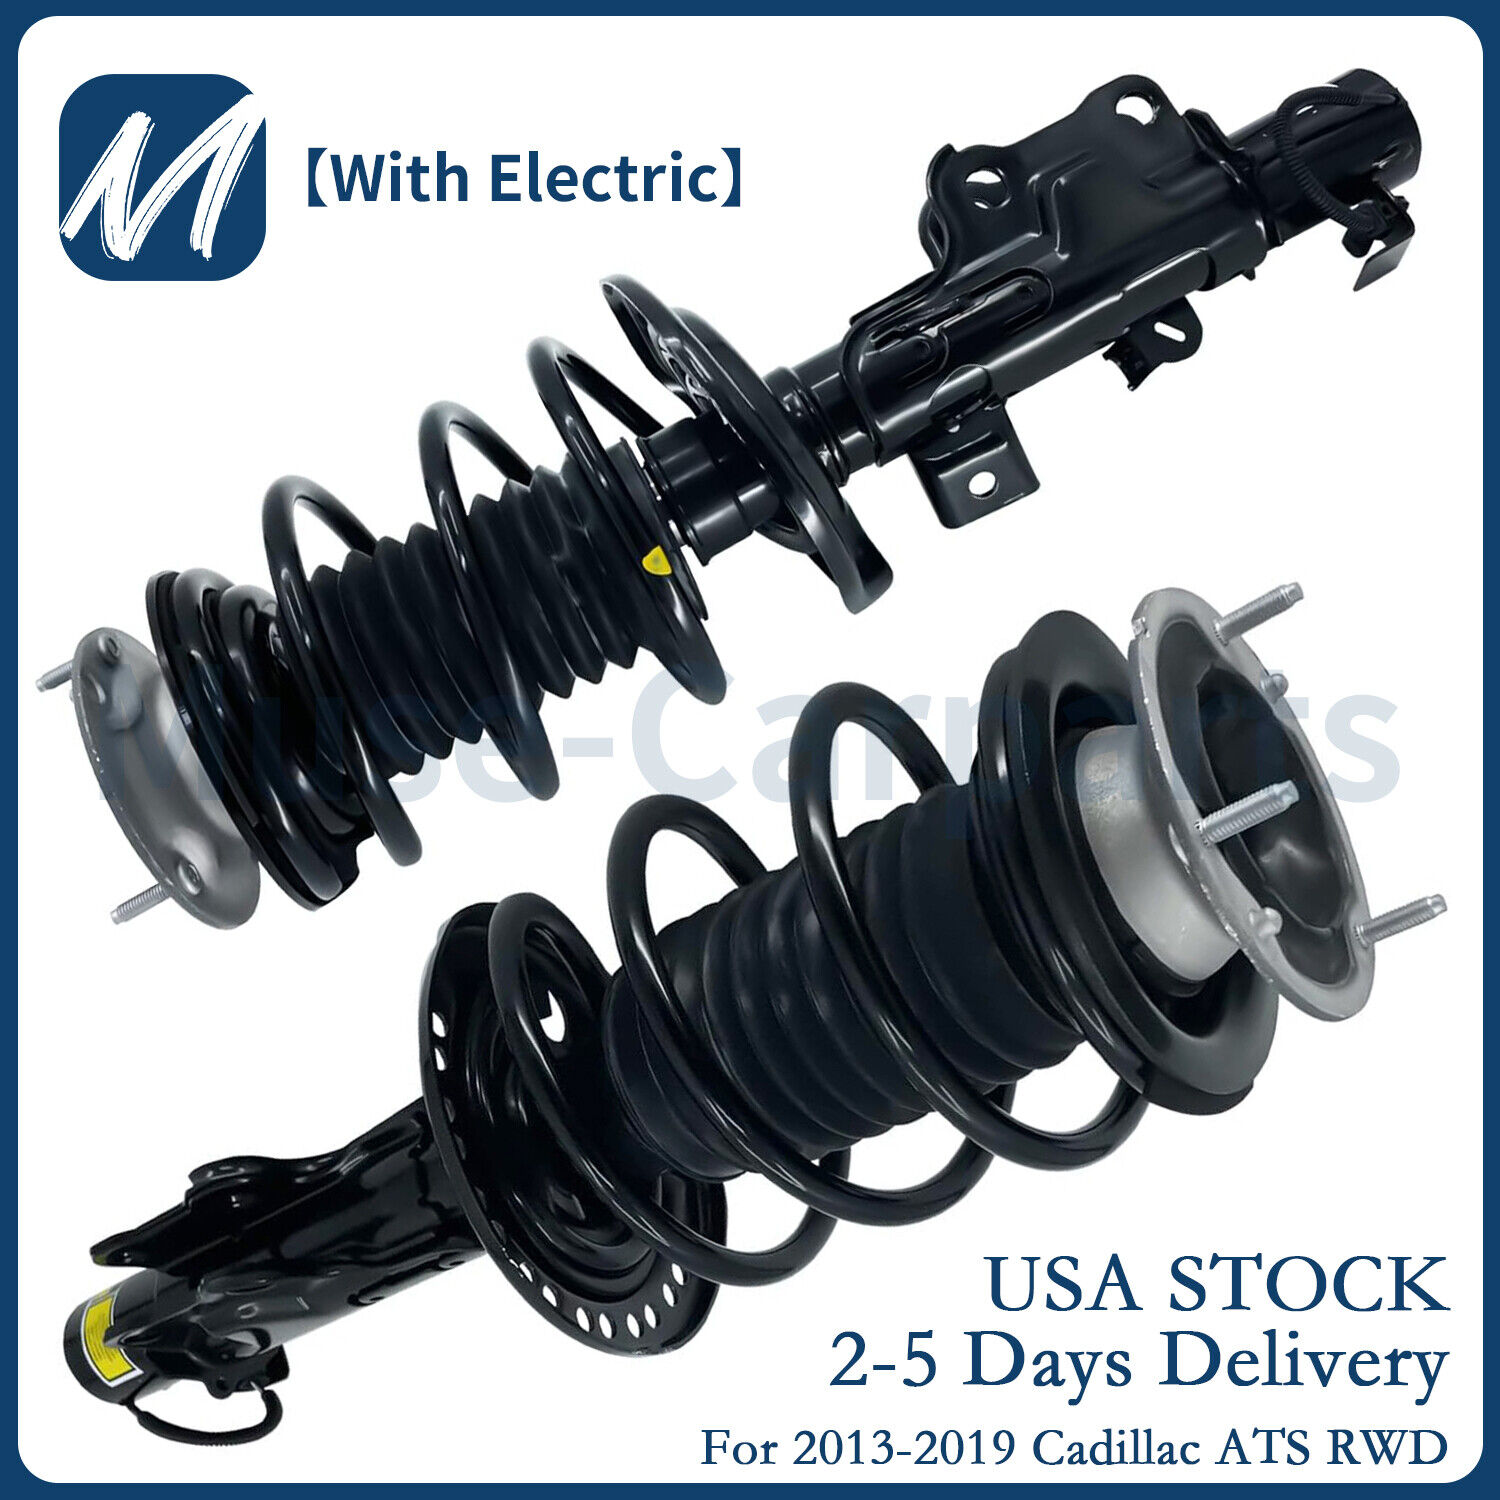 2x Front Shock Struts Spring Assembly w/Electric for Cadillac ATS RWD 2013-2019